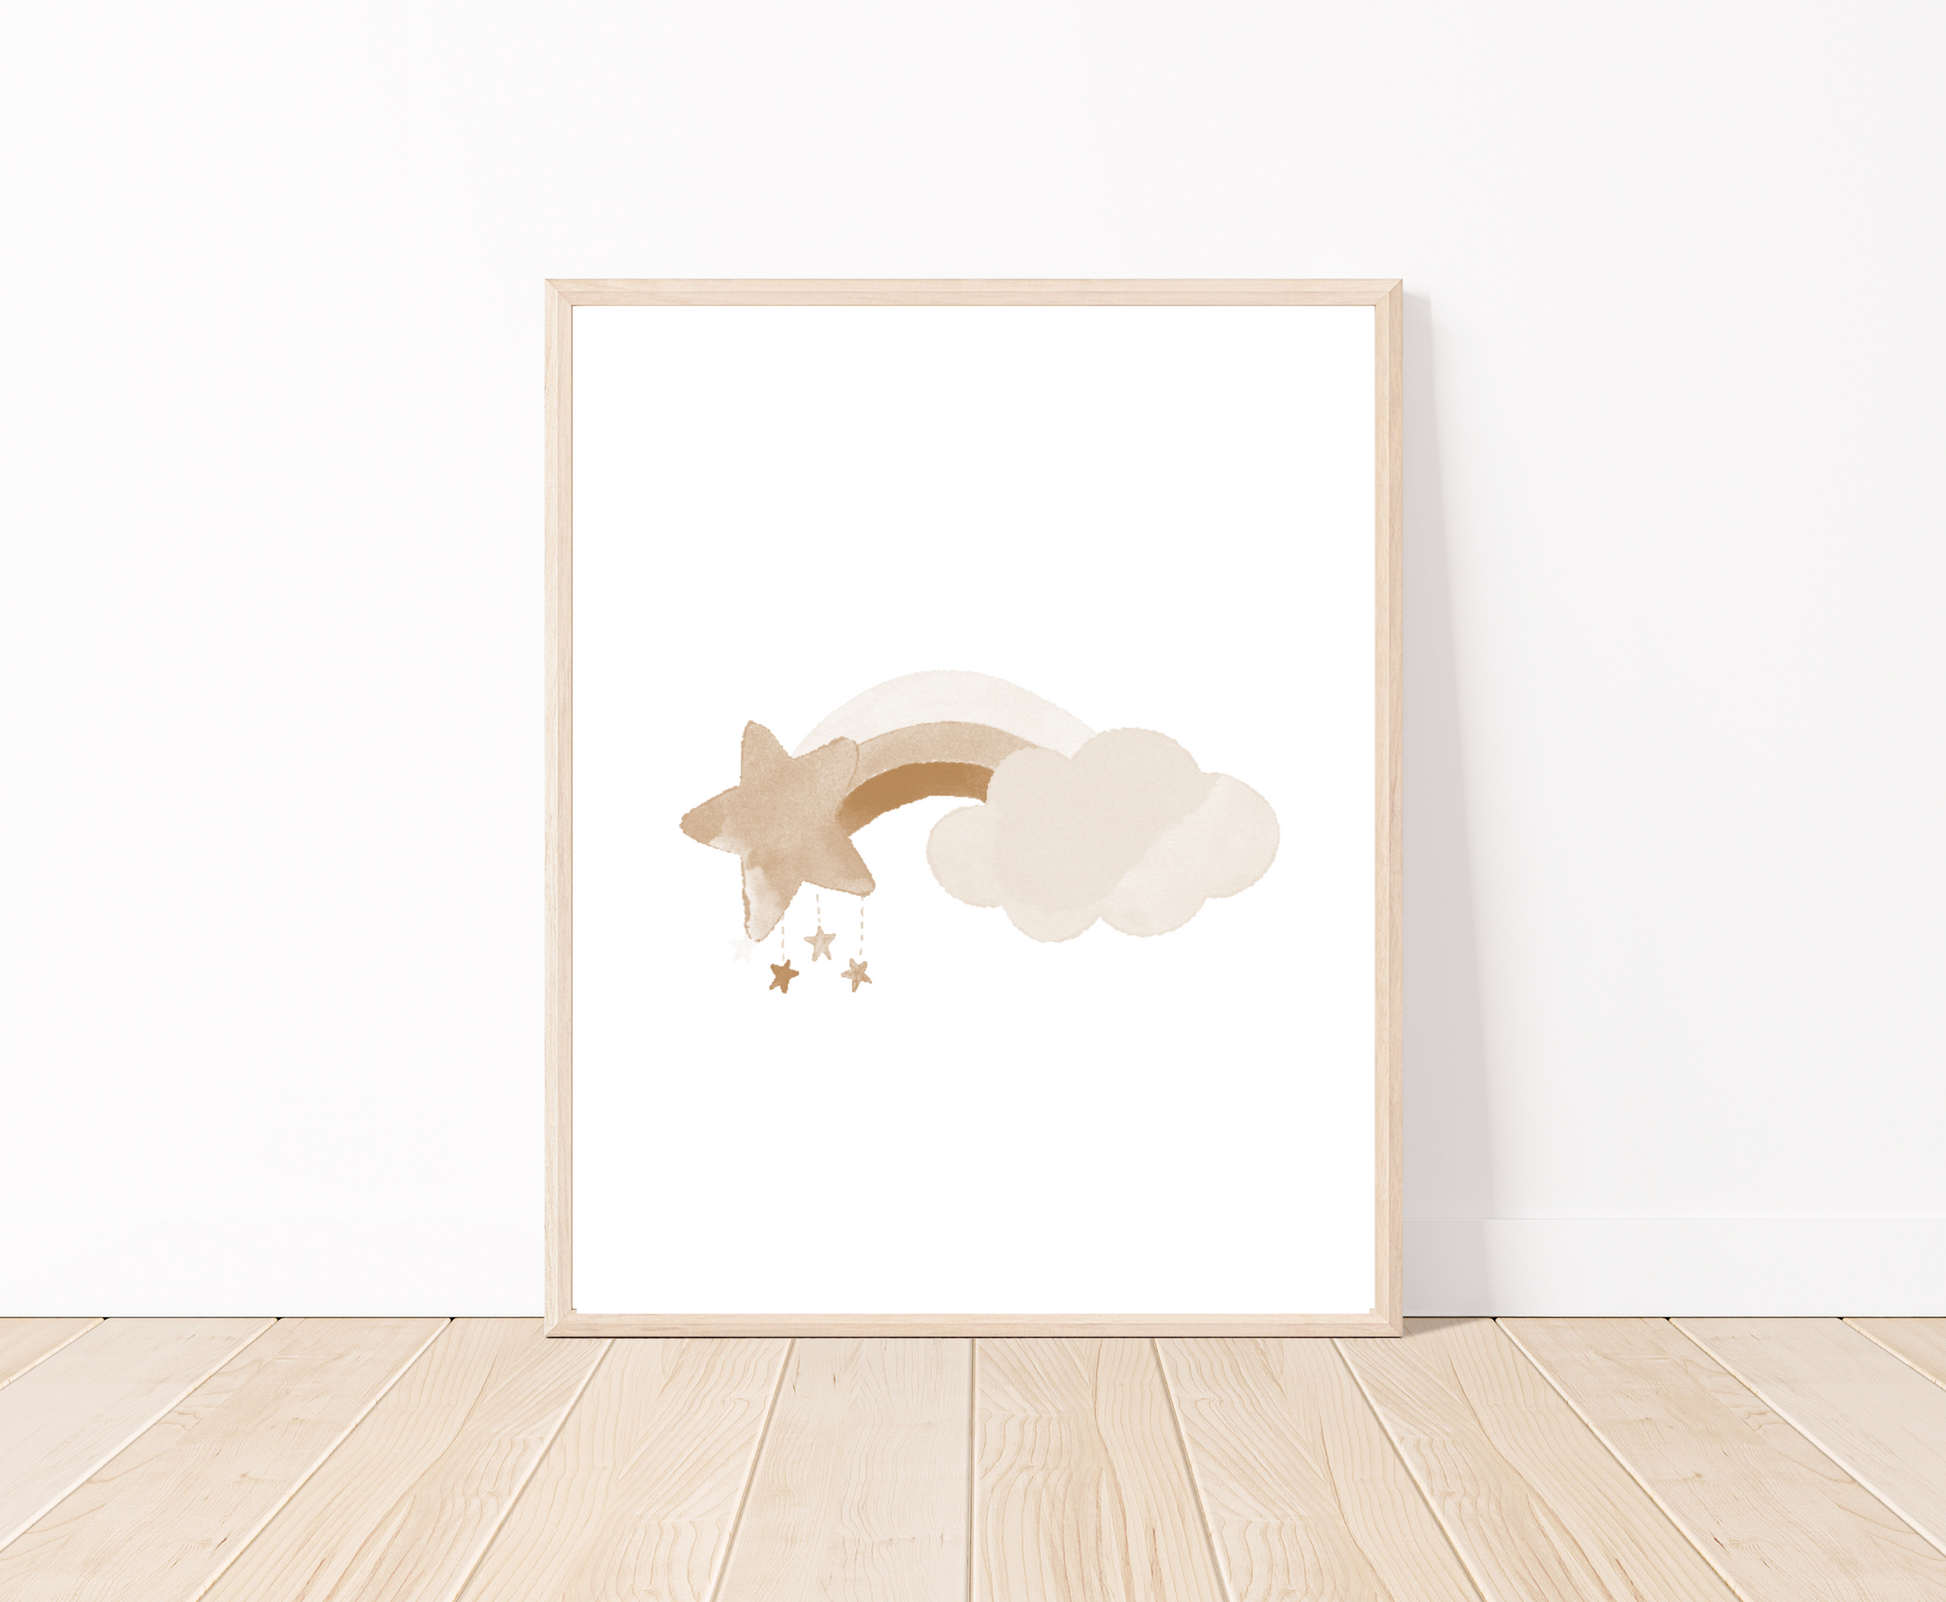 Baby’s digital poster that shows a rainbow in different shades of beige behind a cloud and a star with tiny stars dangling from it. The frame is placed on a parquet floor.